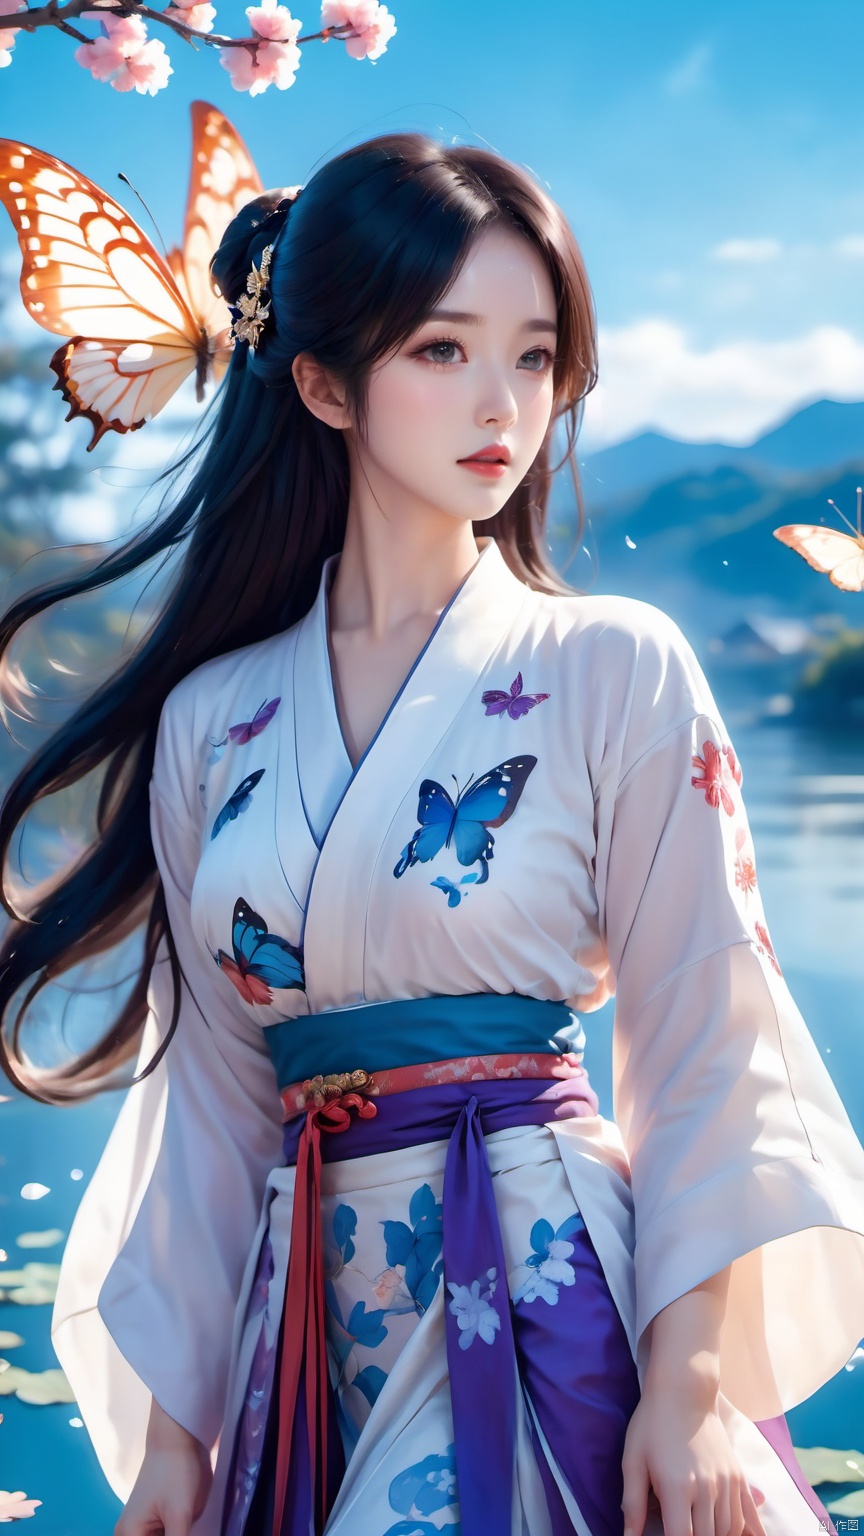 line art,line style,as style,best quality,masterpiece, The image features a beautiful anime-style illustration of a young woman. She has long black hair and is dressed in a traditional Chinese outfit. The outfit consists of a white top with blue and purple accents, a long skirt, and a butterfly-shaped mirror in her hand. She stands against a backdrop of a clear blue sky and a body of water, with butterflies fluttering around her. AI painting pure tag structure: anime, art, illustration, traditional clothes, blue, white, long hair, black hair, butterfly, mirror, sky, water